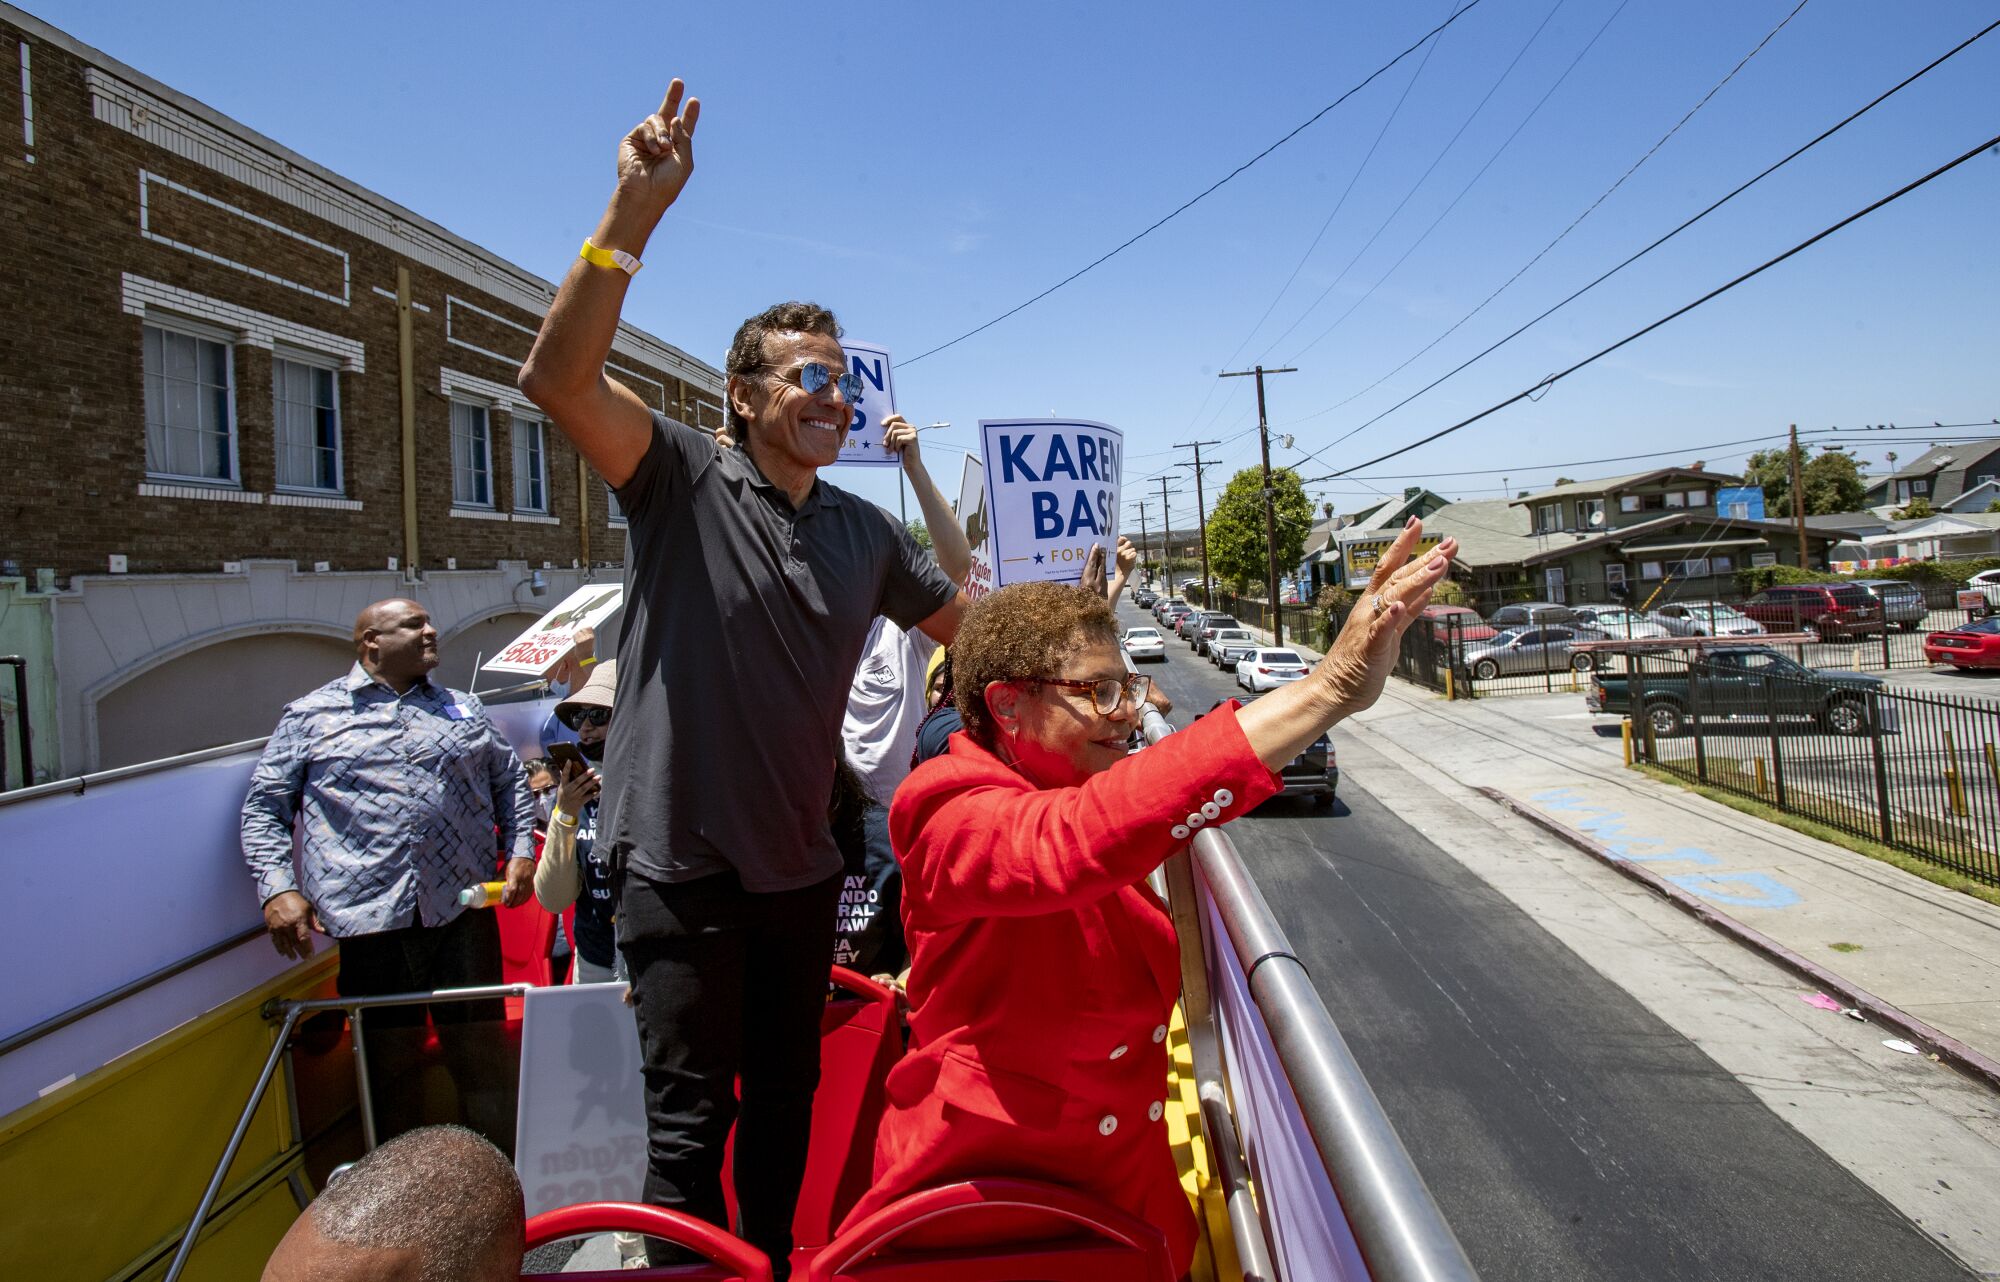 Rep. Karen Bass and former Mayor Antonio Villaraigosa wave to onlookers from a double-decker bus during a campaign event 